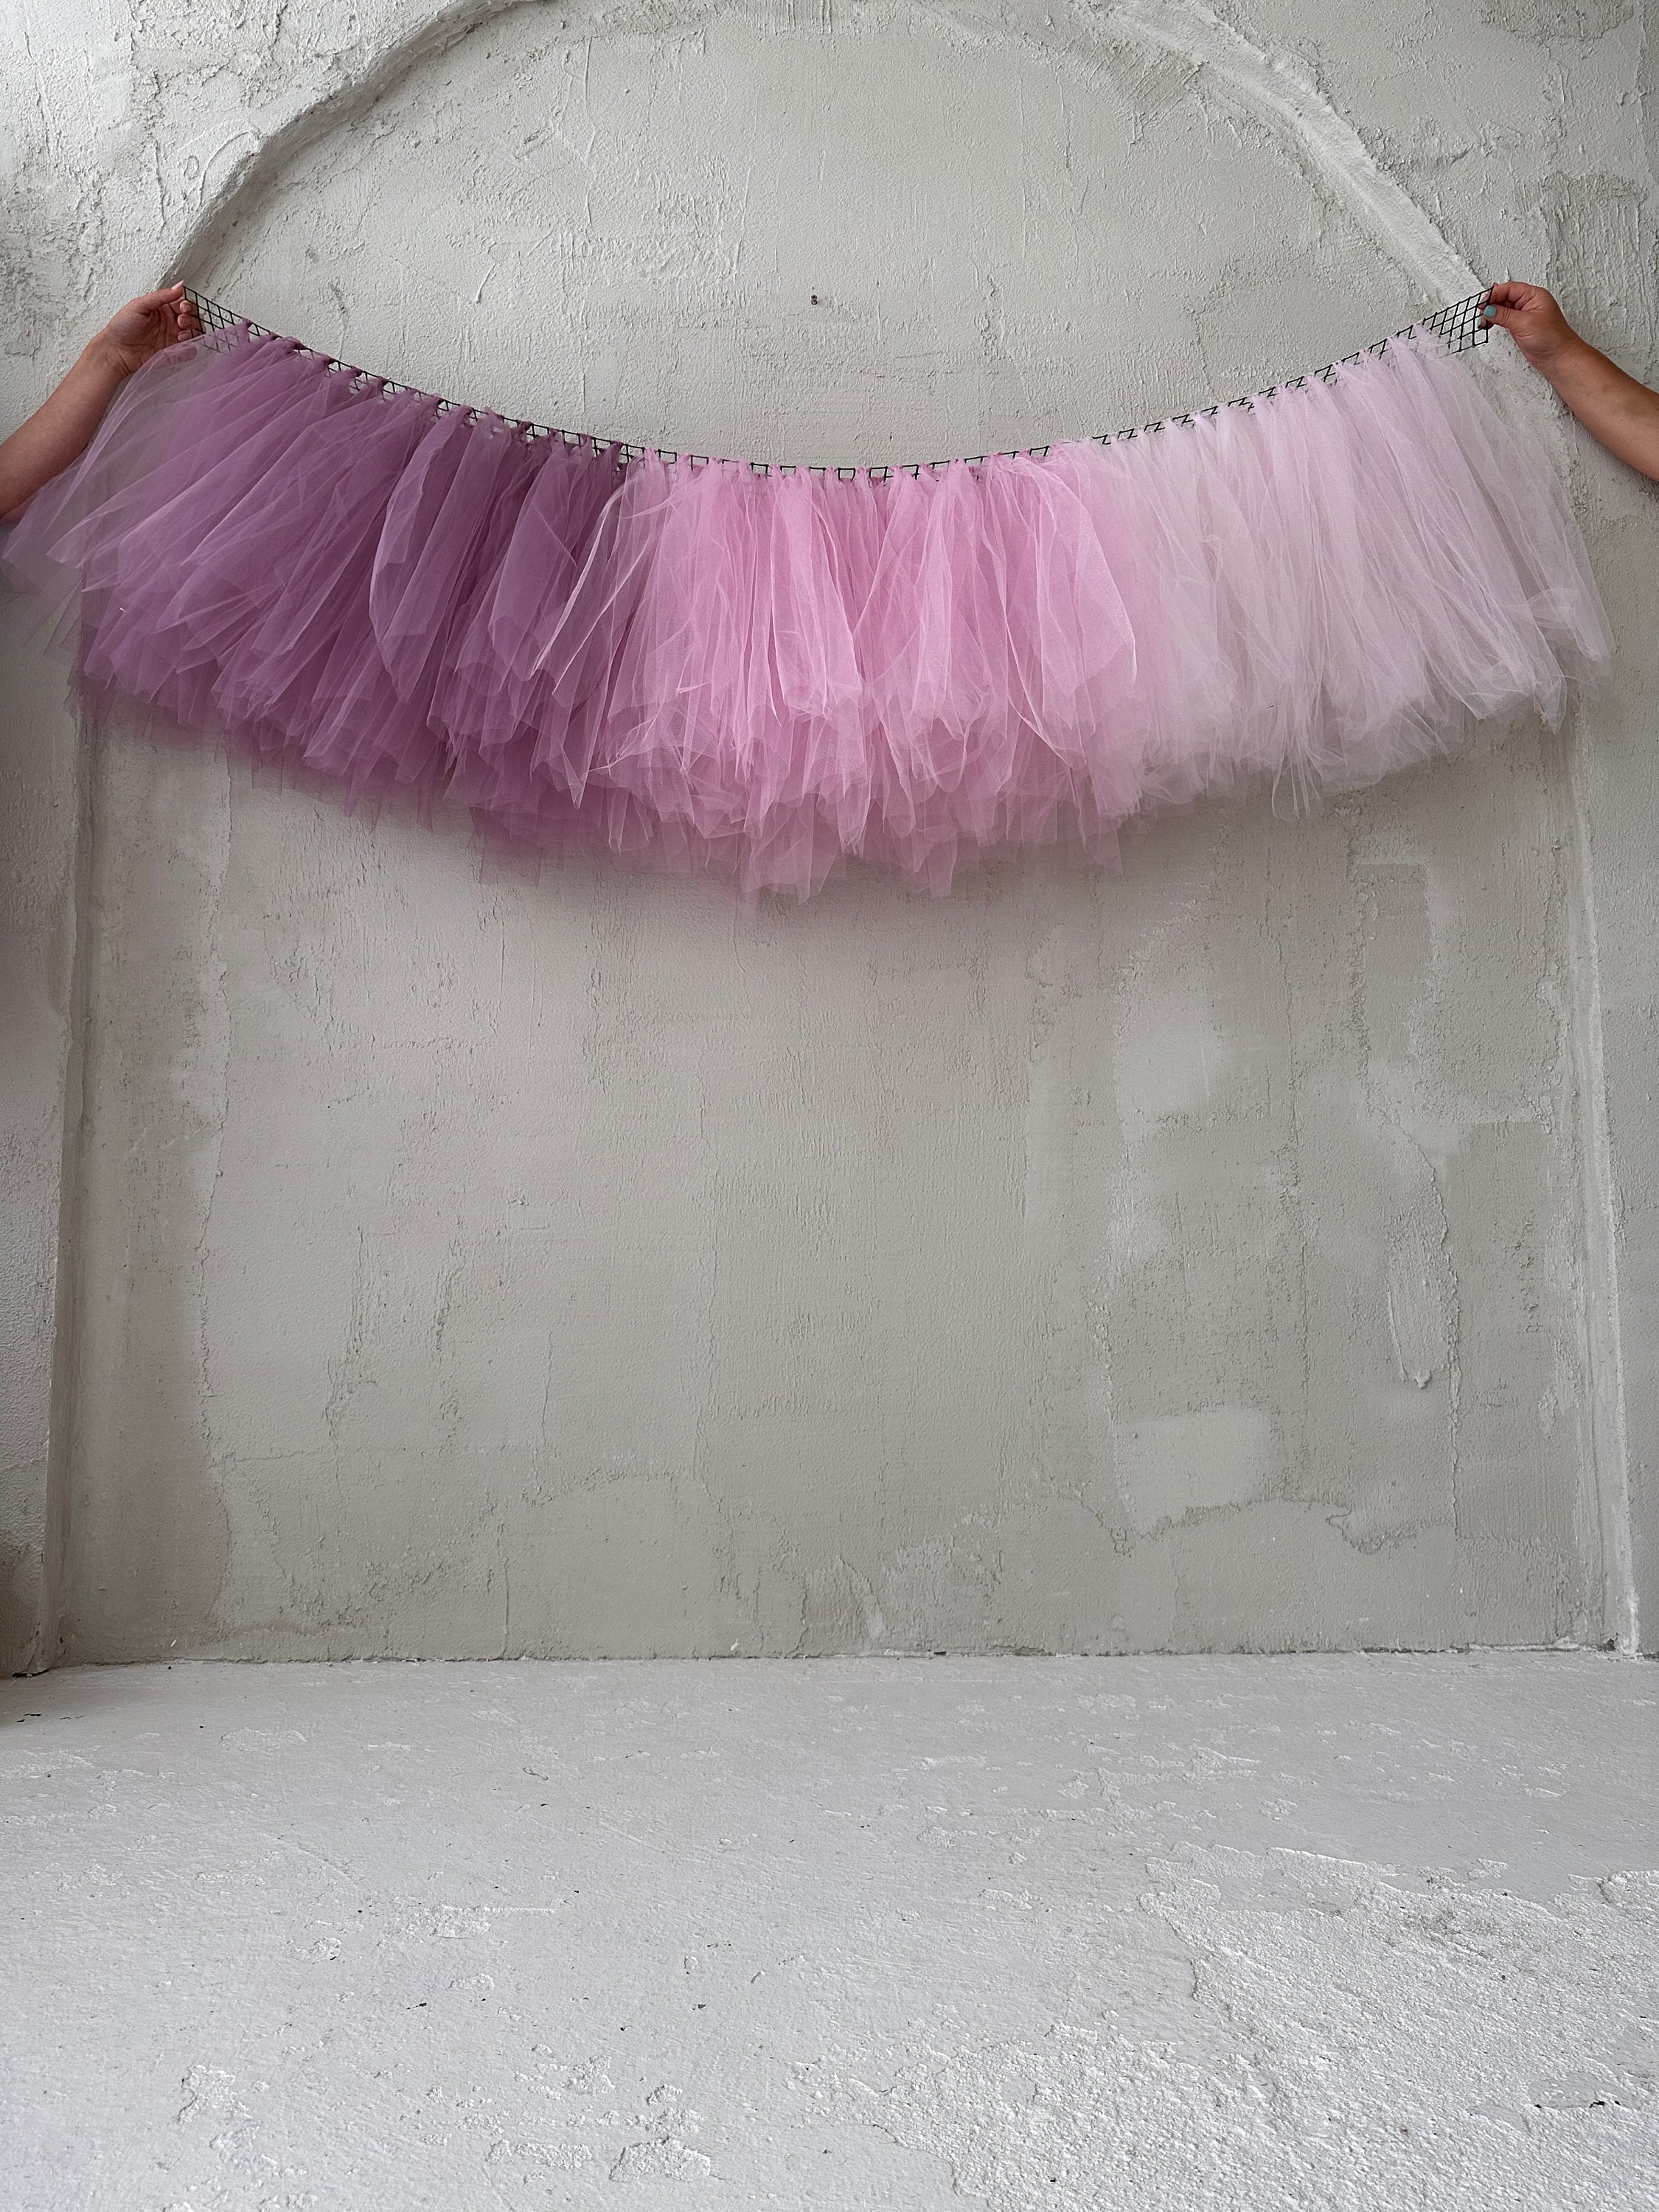 Enchanted Pink & Purple Streamer Backdrop with Ruffled Streamers and Crepe  Paper Flowers